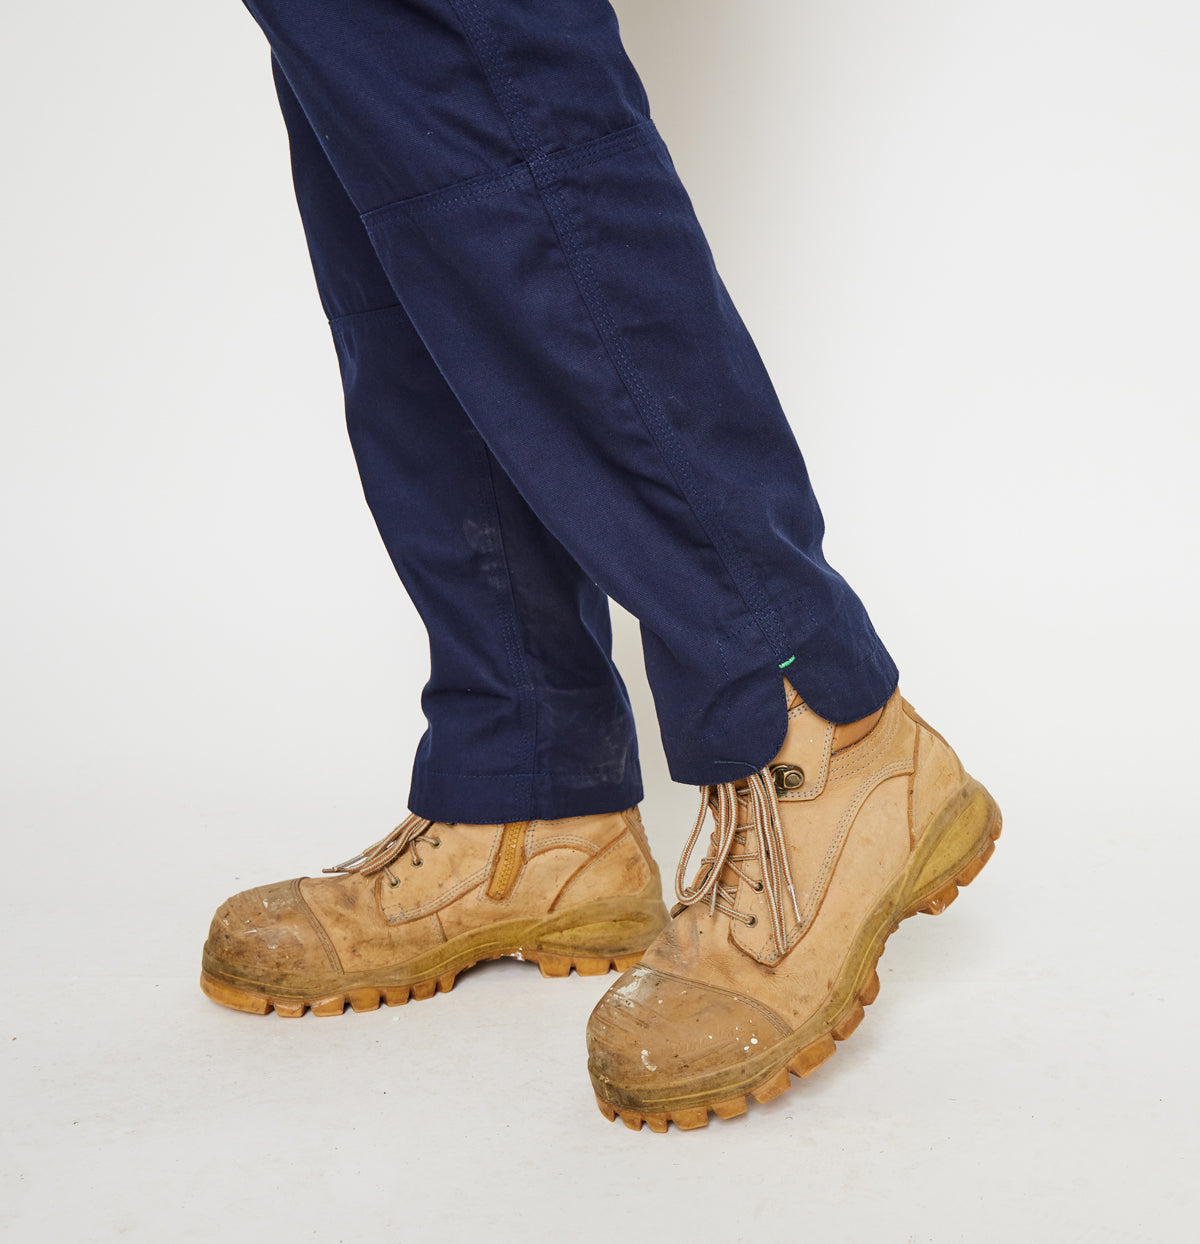 Utility Work Pants - Intuition